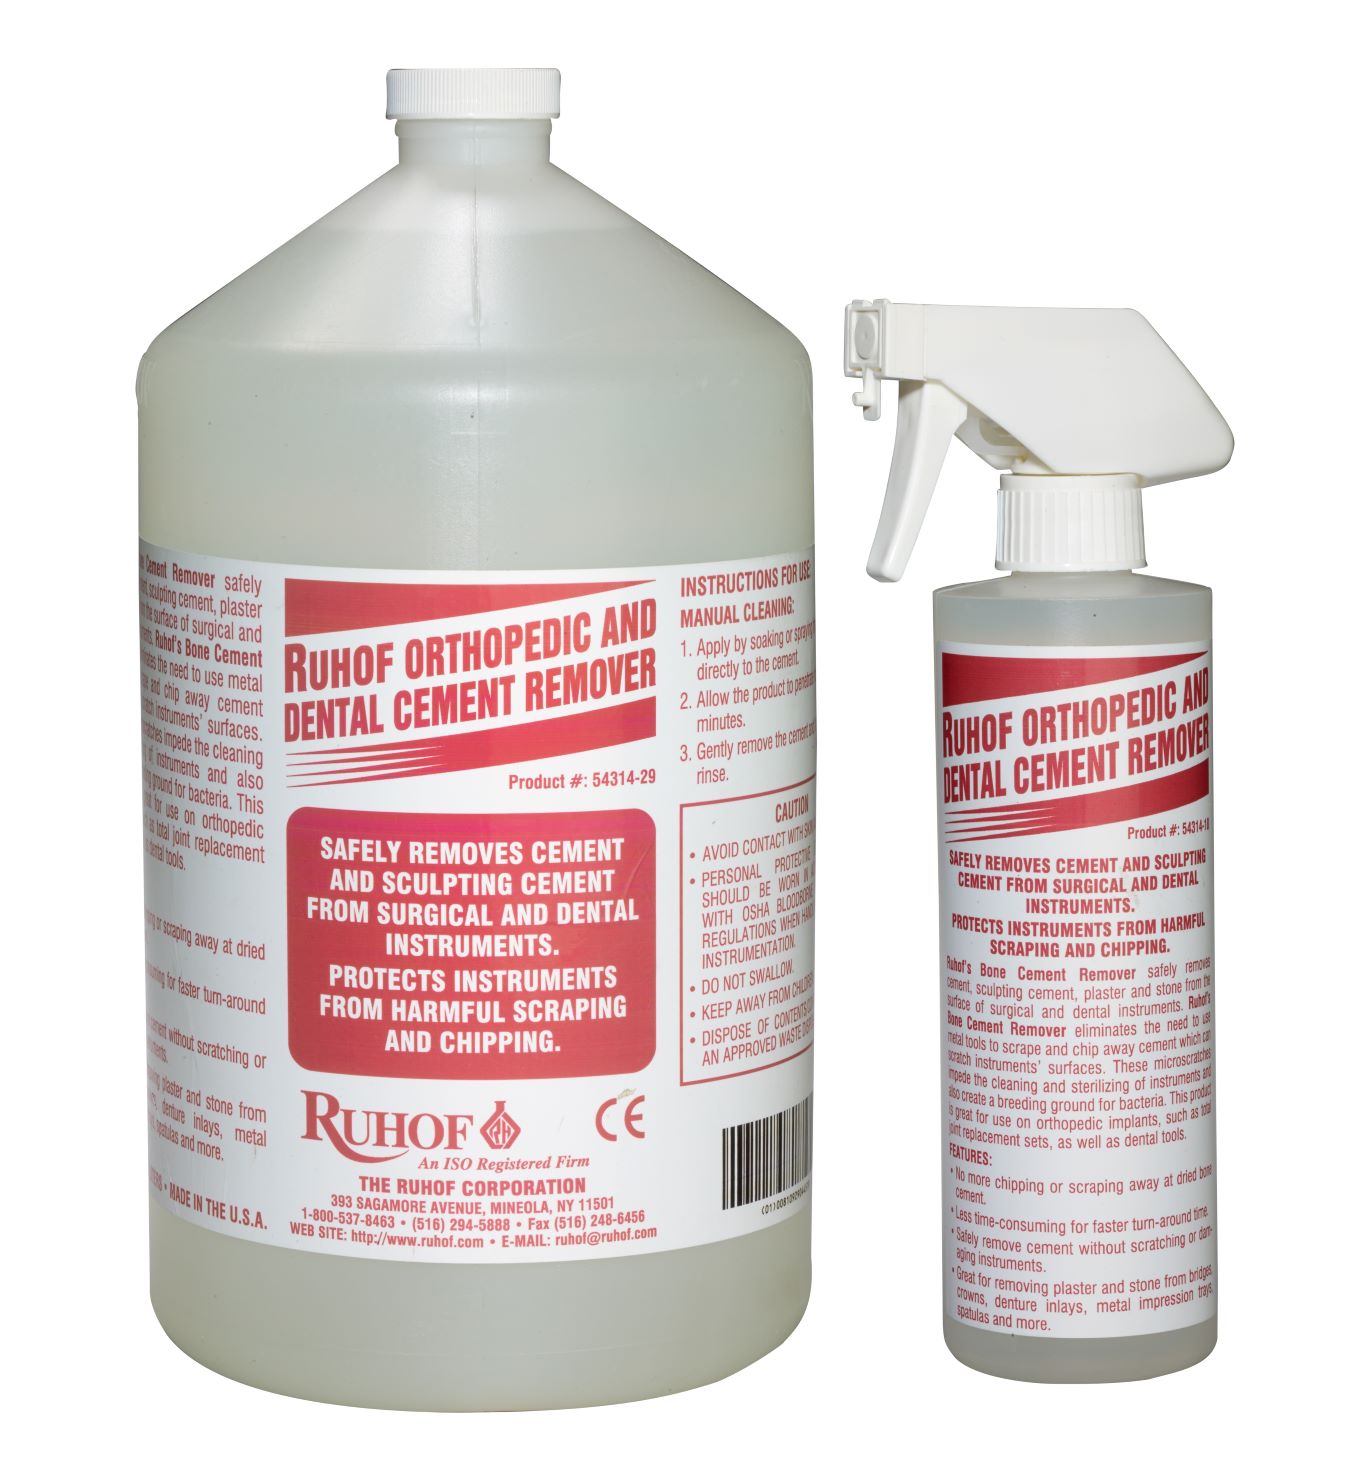 Ruhof Orthopedic and Dental Cement Remover – Ruhof Healthcare